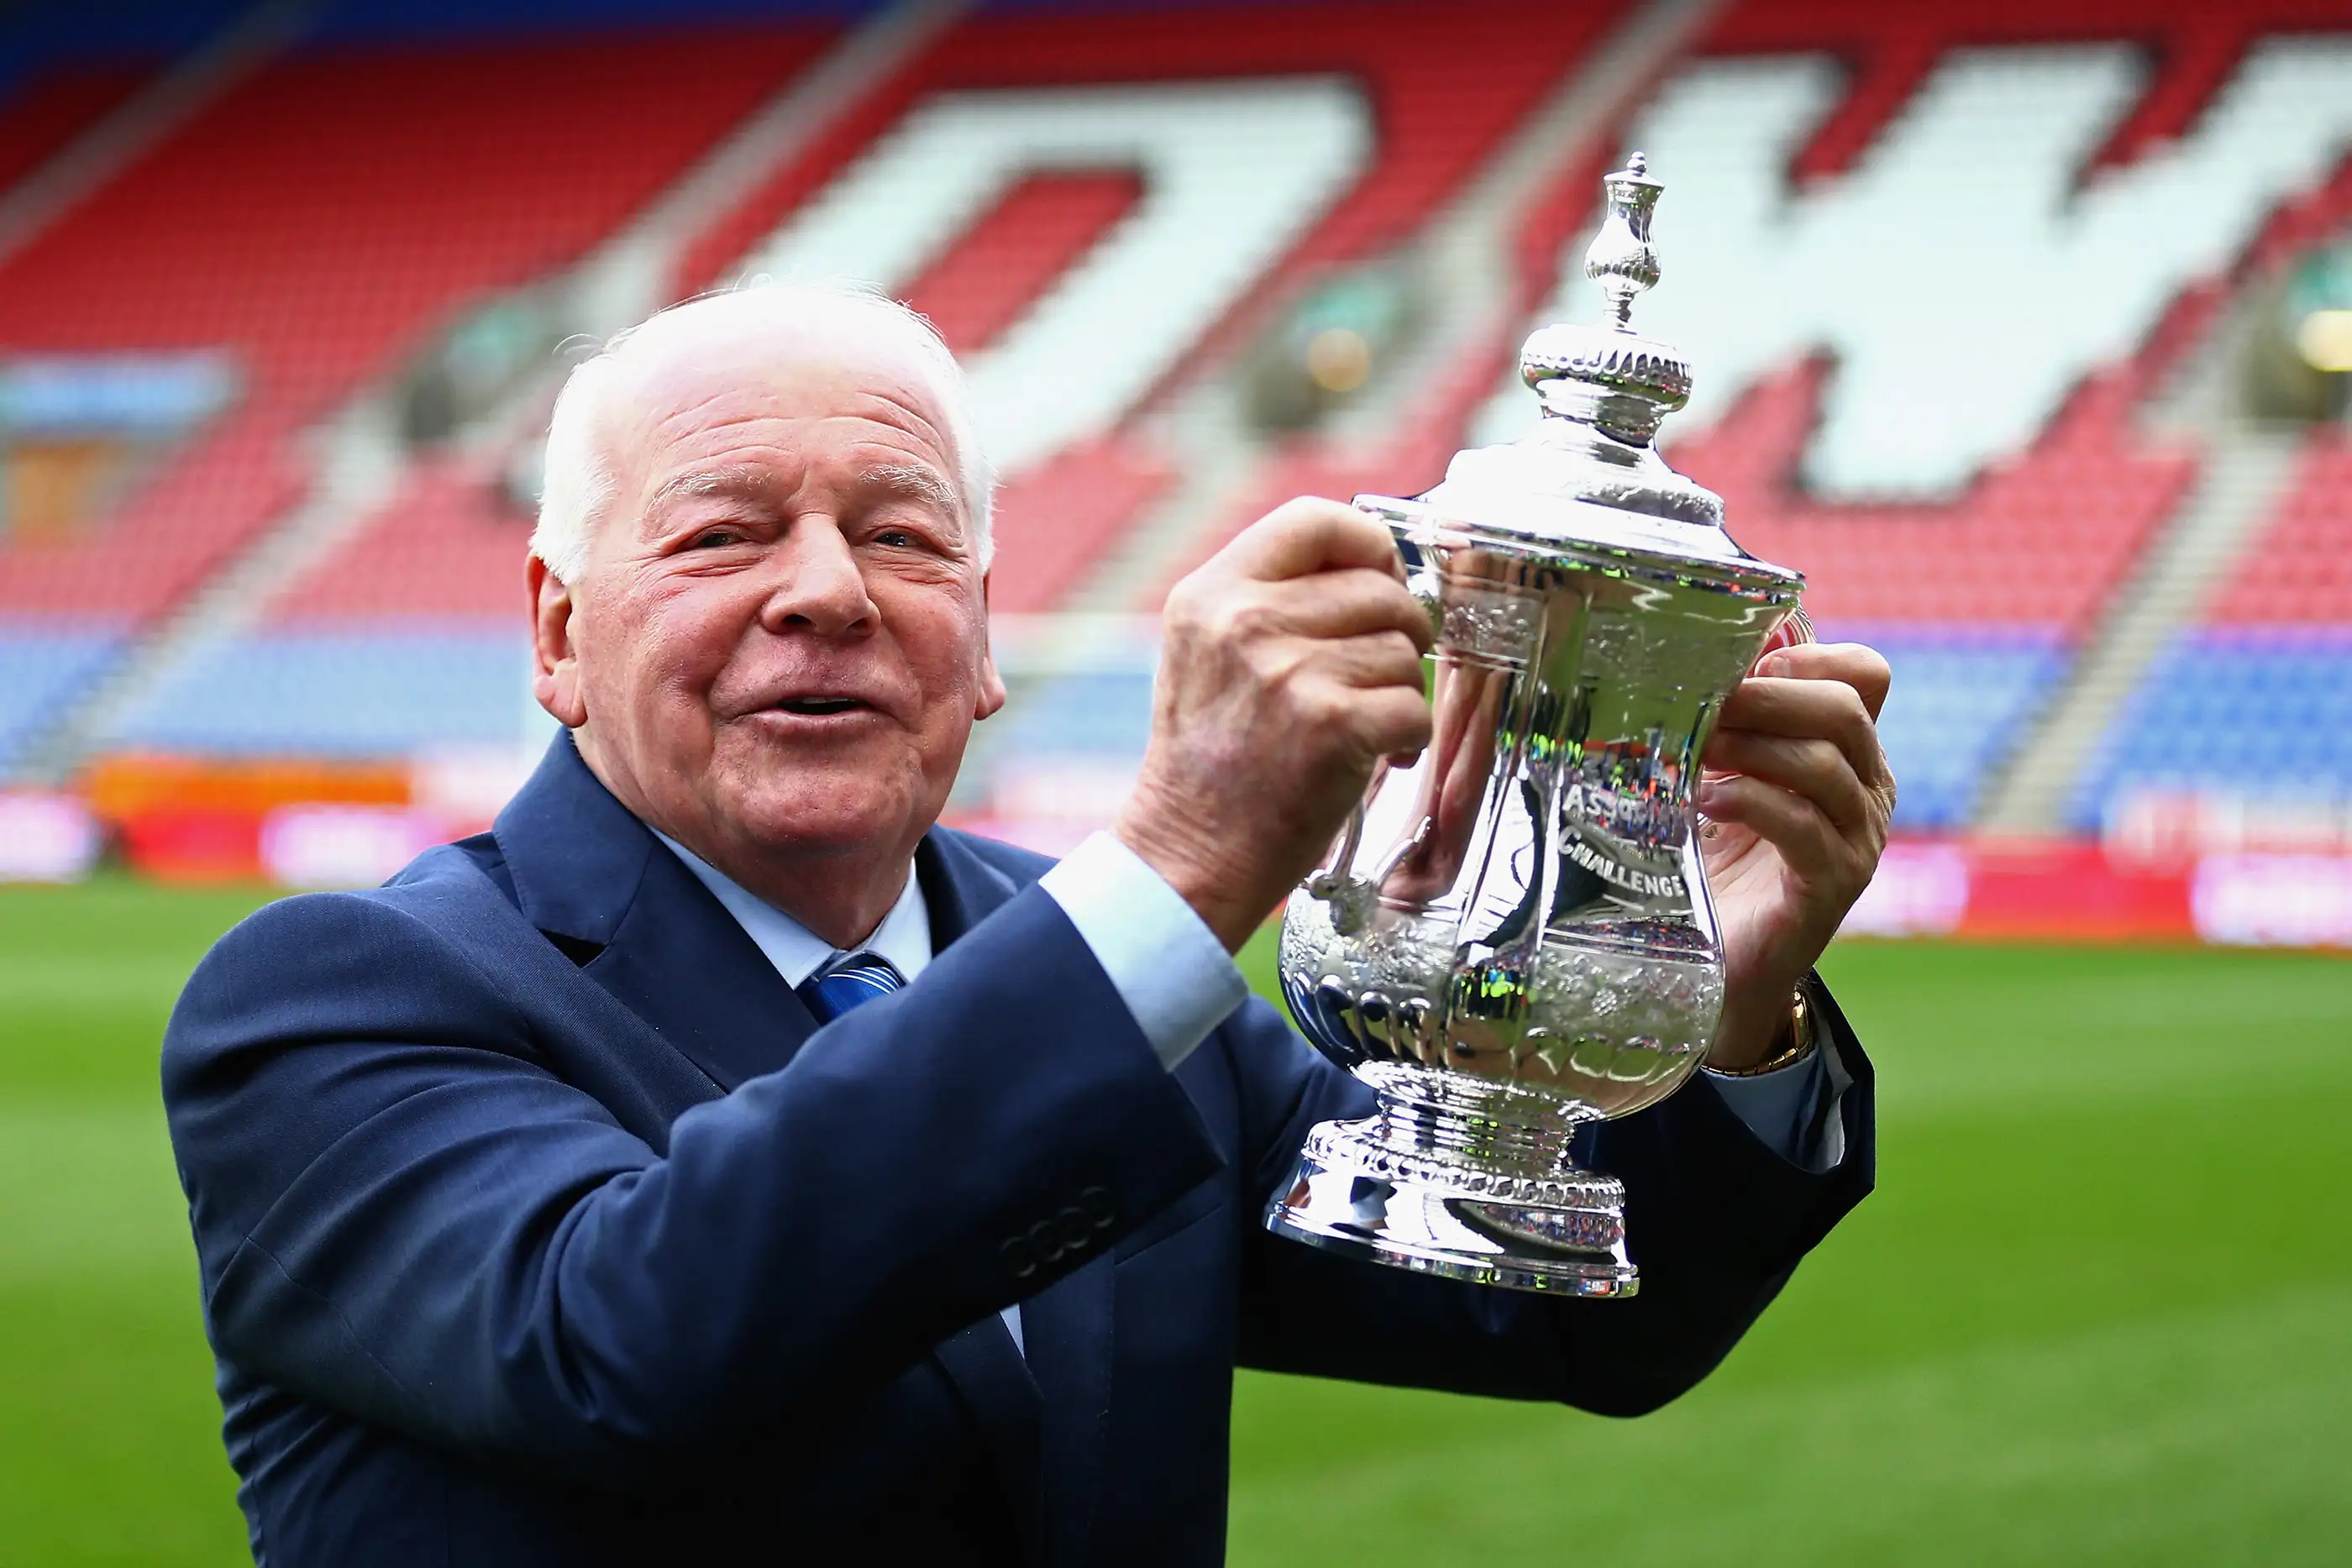 Wigan Athletic Chairman Dave Whelan holds the FA Cup prior to the Budweiser FA Cup fourth round match between Wigan Athletic and Crystal Palace at DW Stadium on January 25, 2014 in Wigan, England.